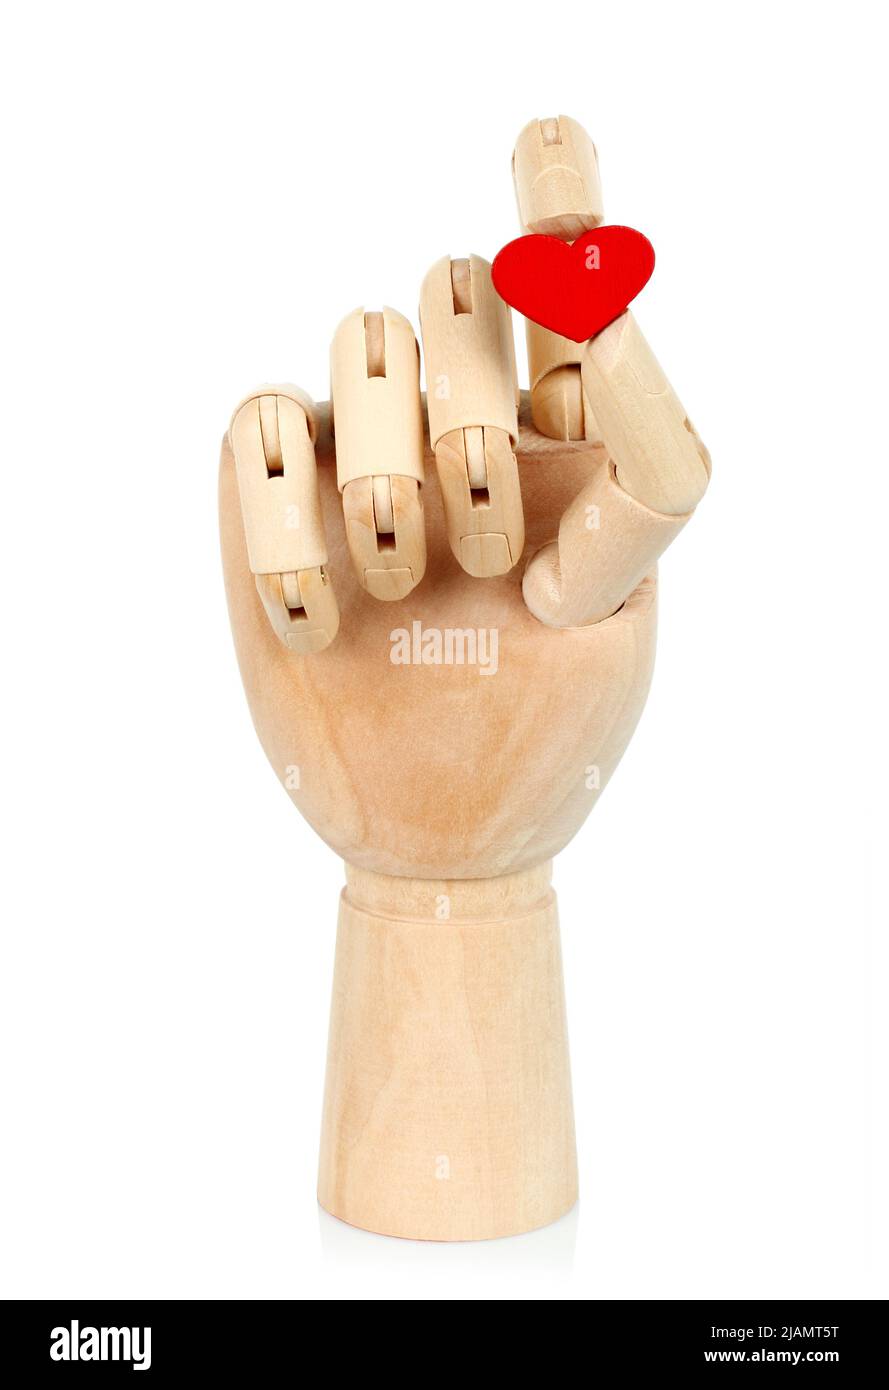 Wooden hand holds red heart,on white background close-up Stock Photo